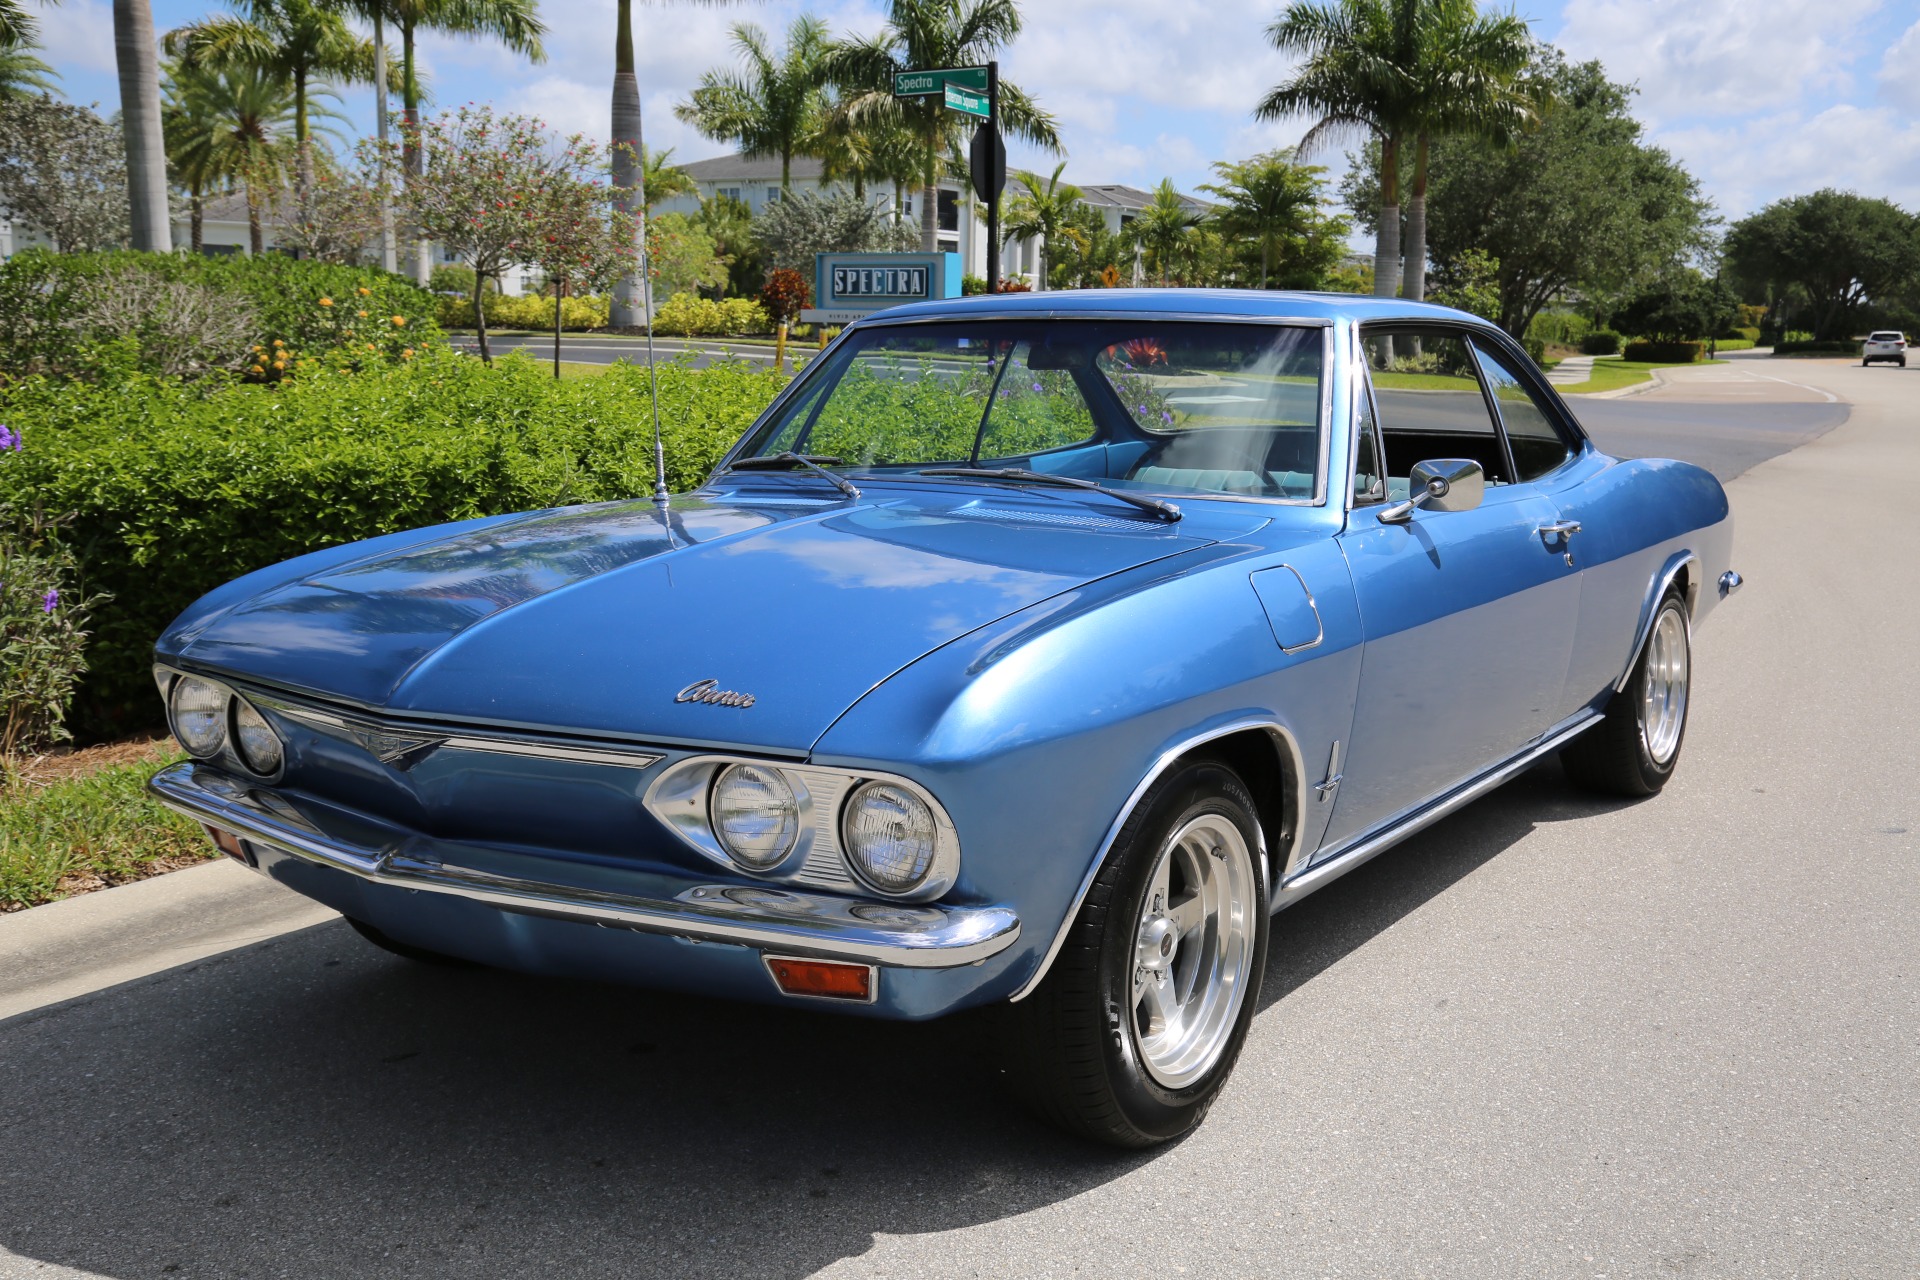 Used 1965 Chevrolet Corvair Corvair Monza for sale Sold at Muscle Cars for Sale Inc. in Fort Myers FL 33912 6